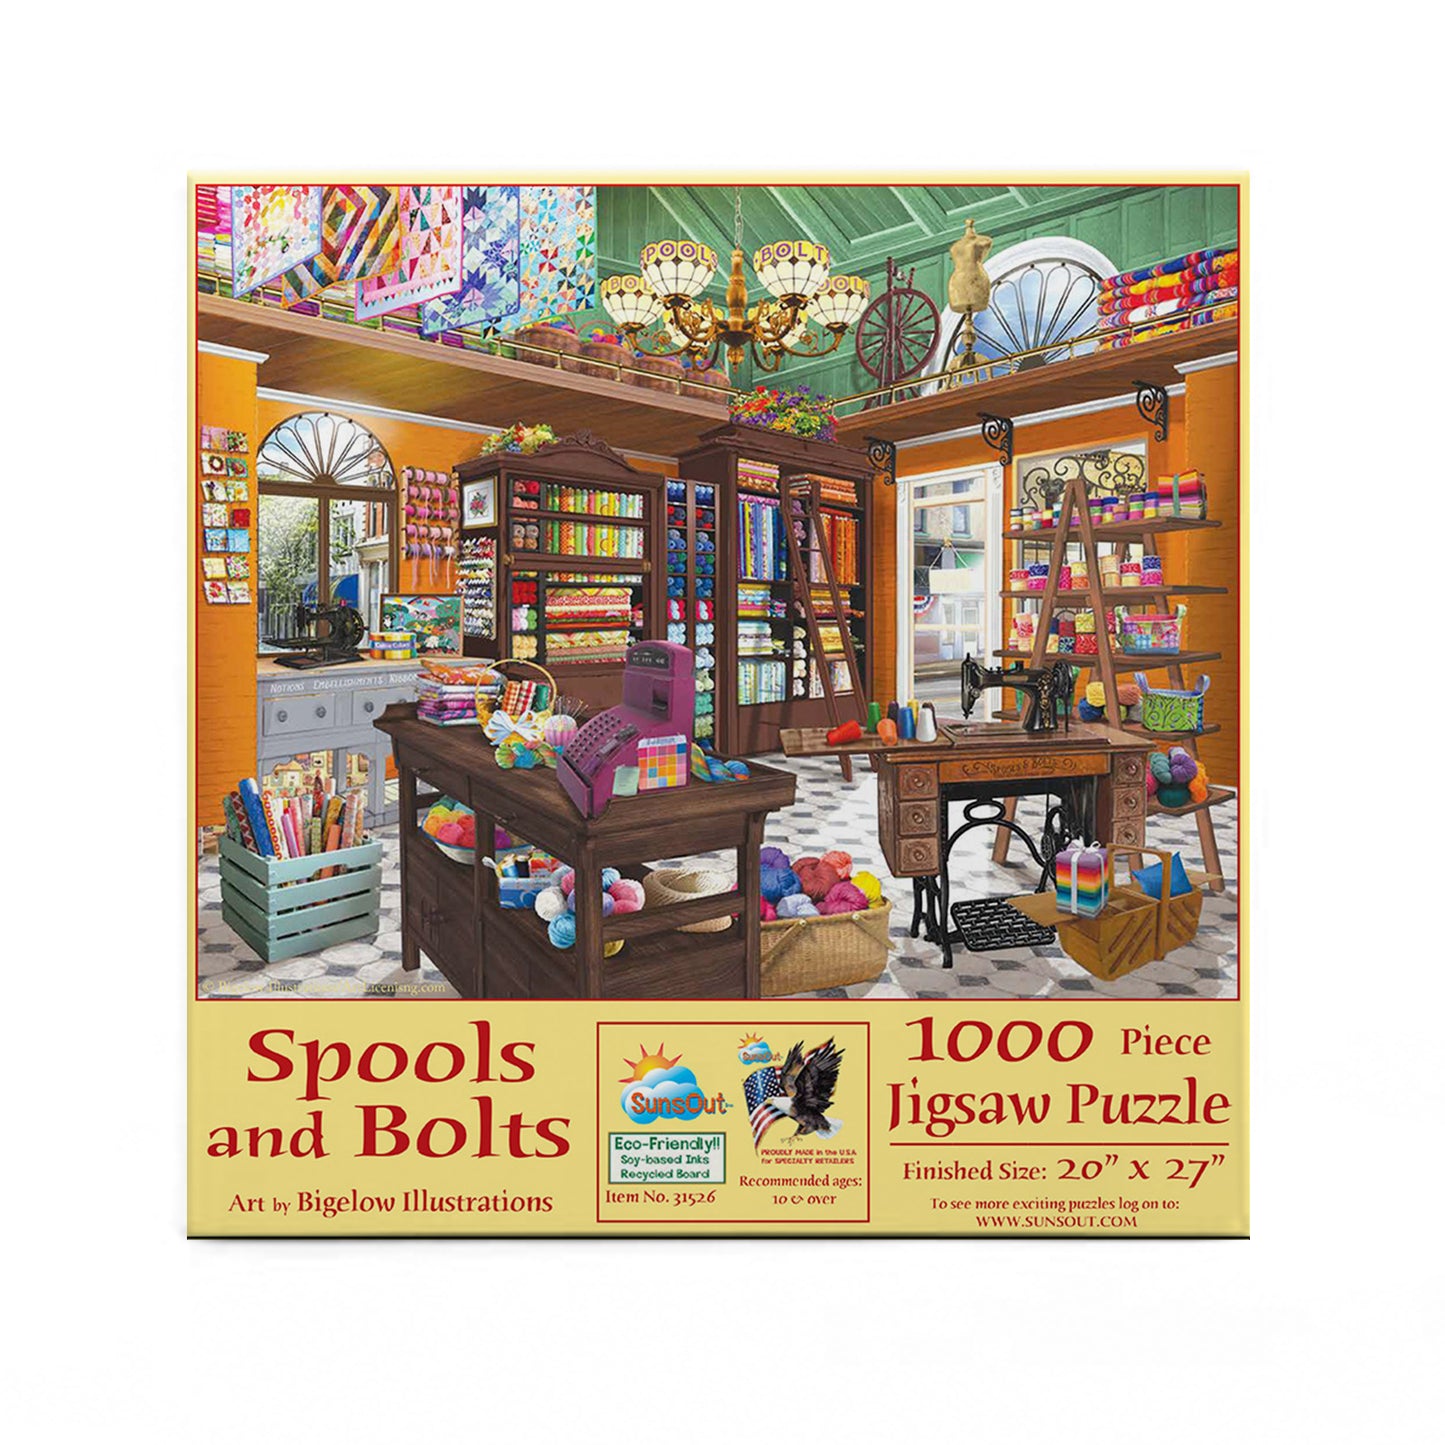 Spools and Bolts - 1000 Piece Jigsaw Puzzle